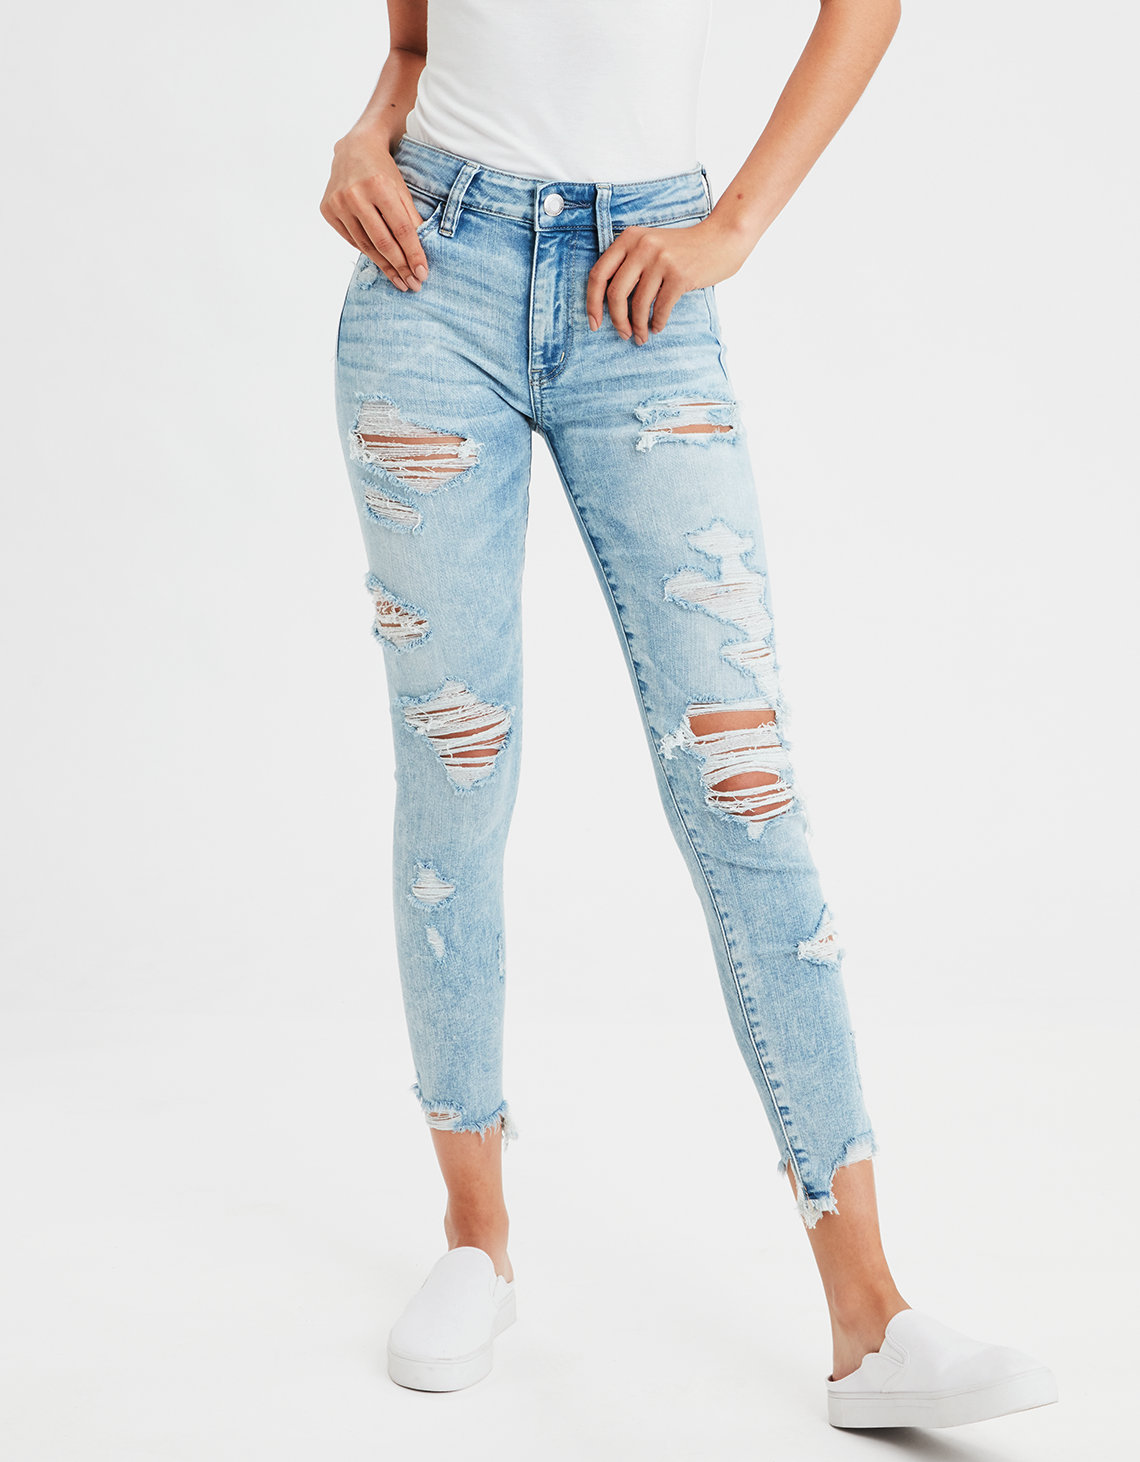 This is one of the best websites to get nice jeans for cheap!